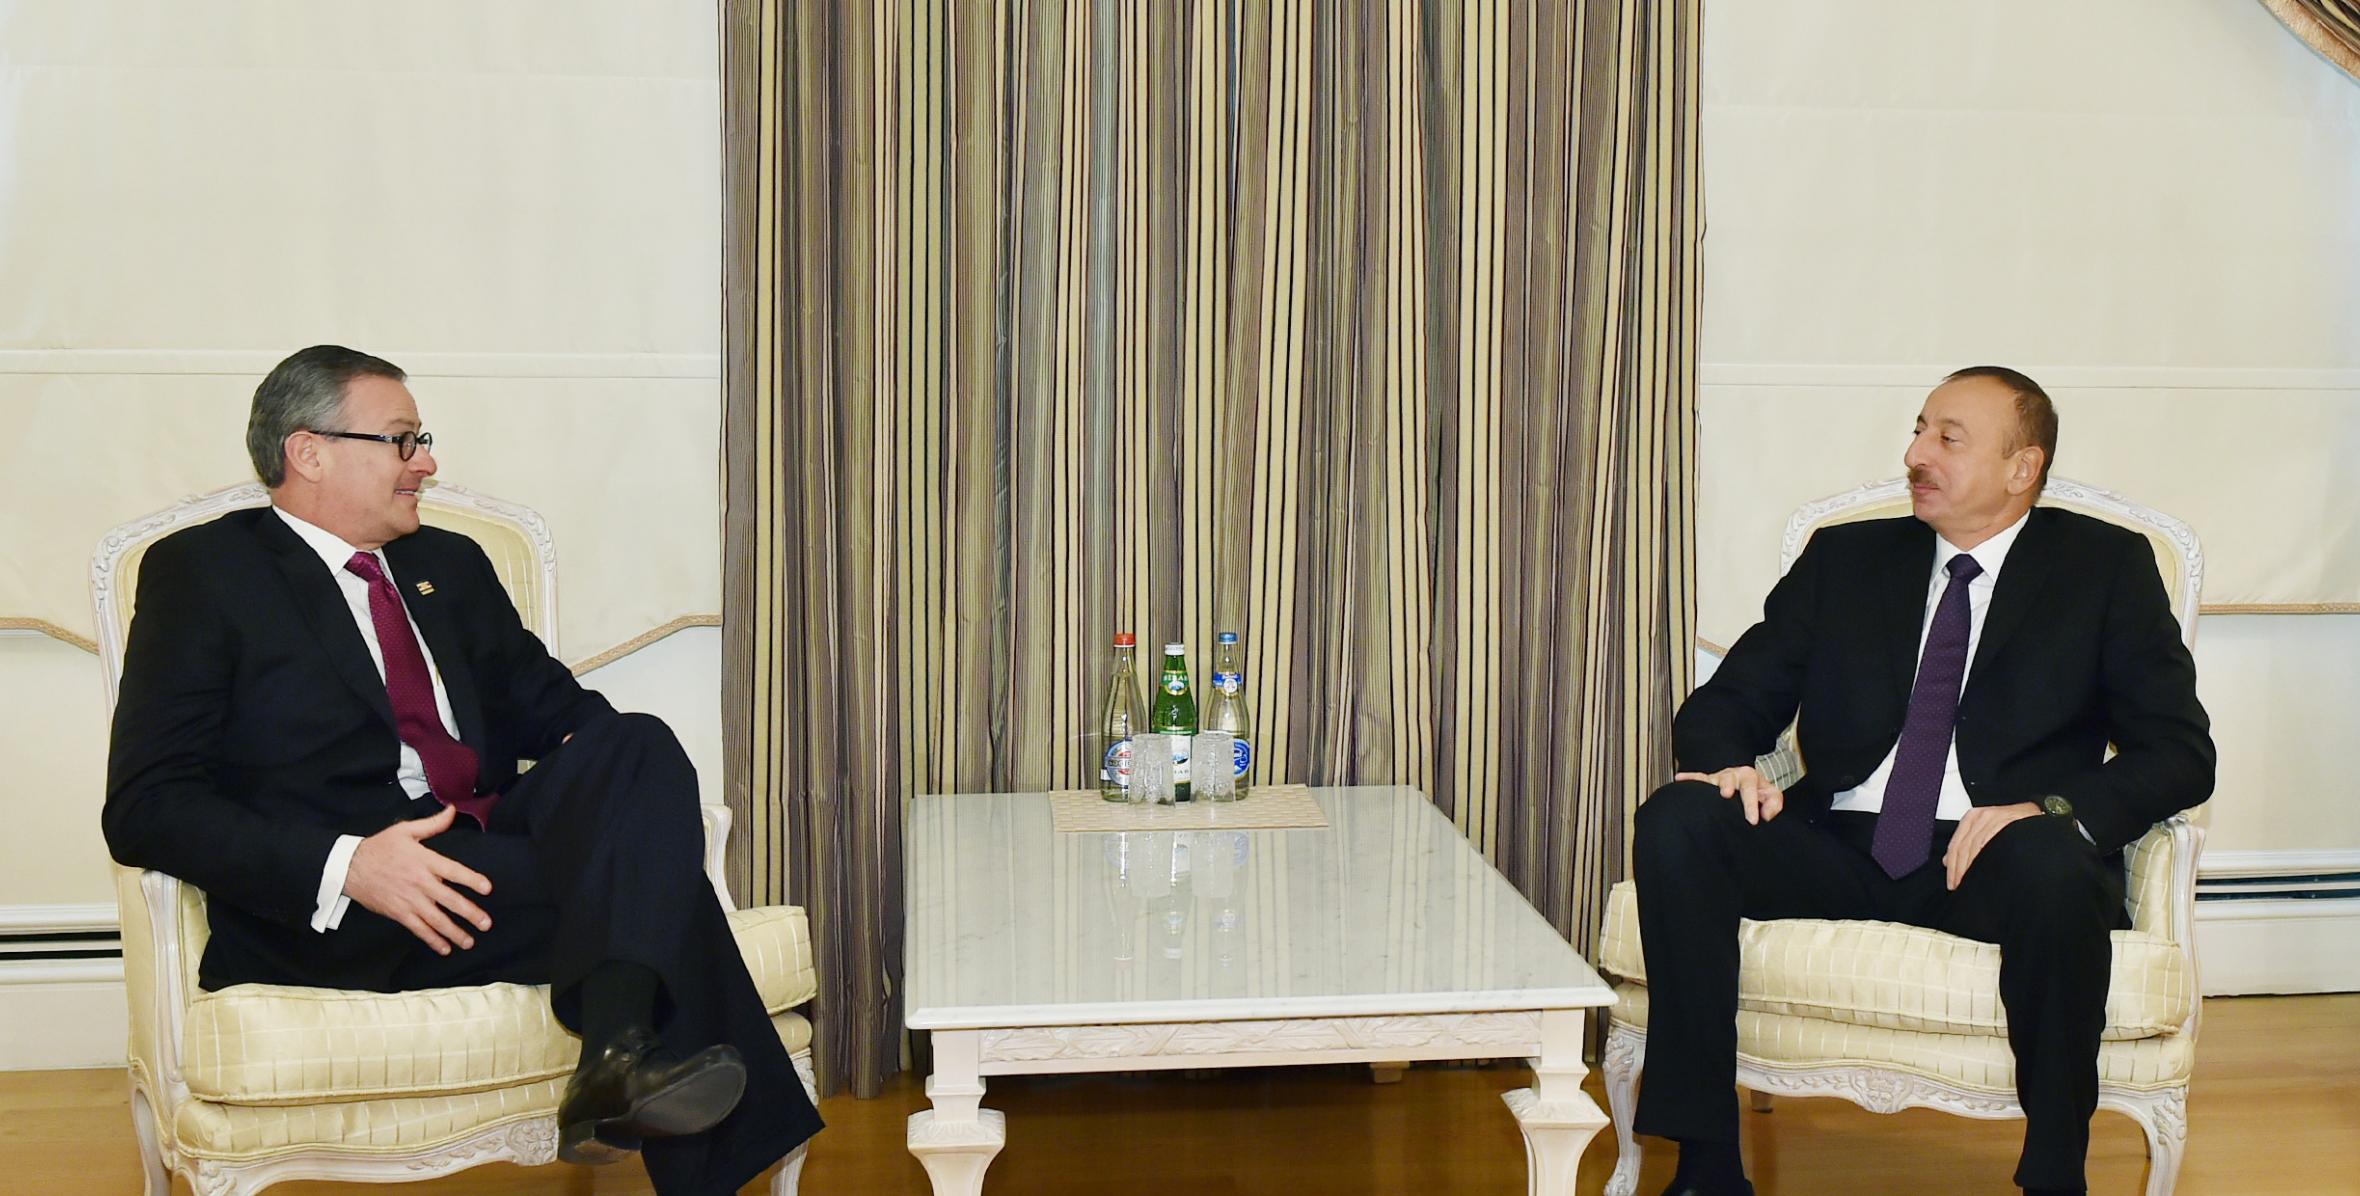 Ilham Aliyev received the Costa Rican Minister of Foreign Affairs and Religion